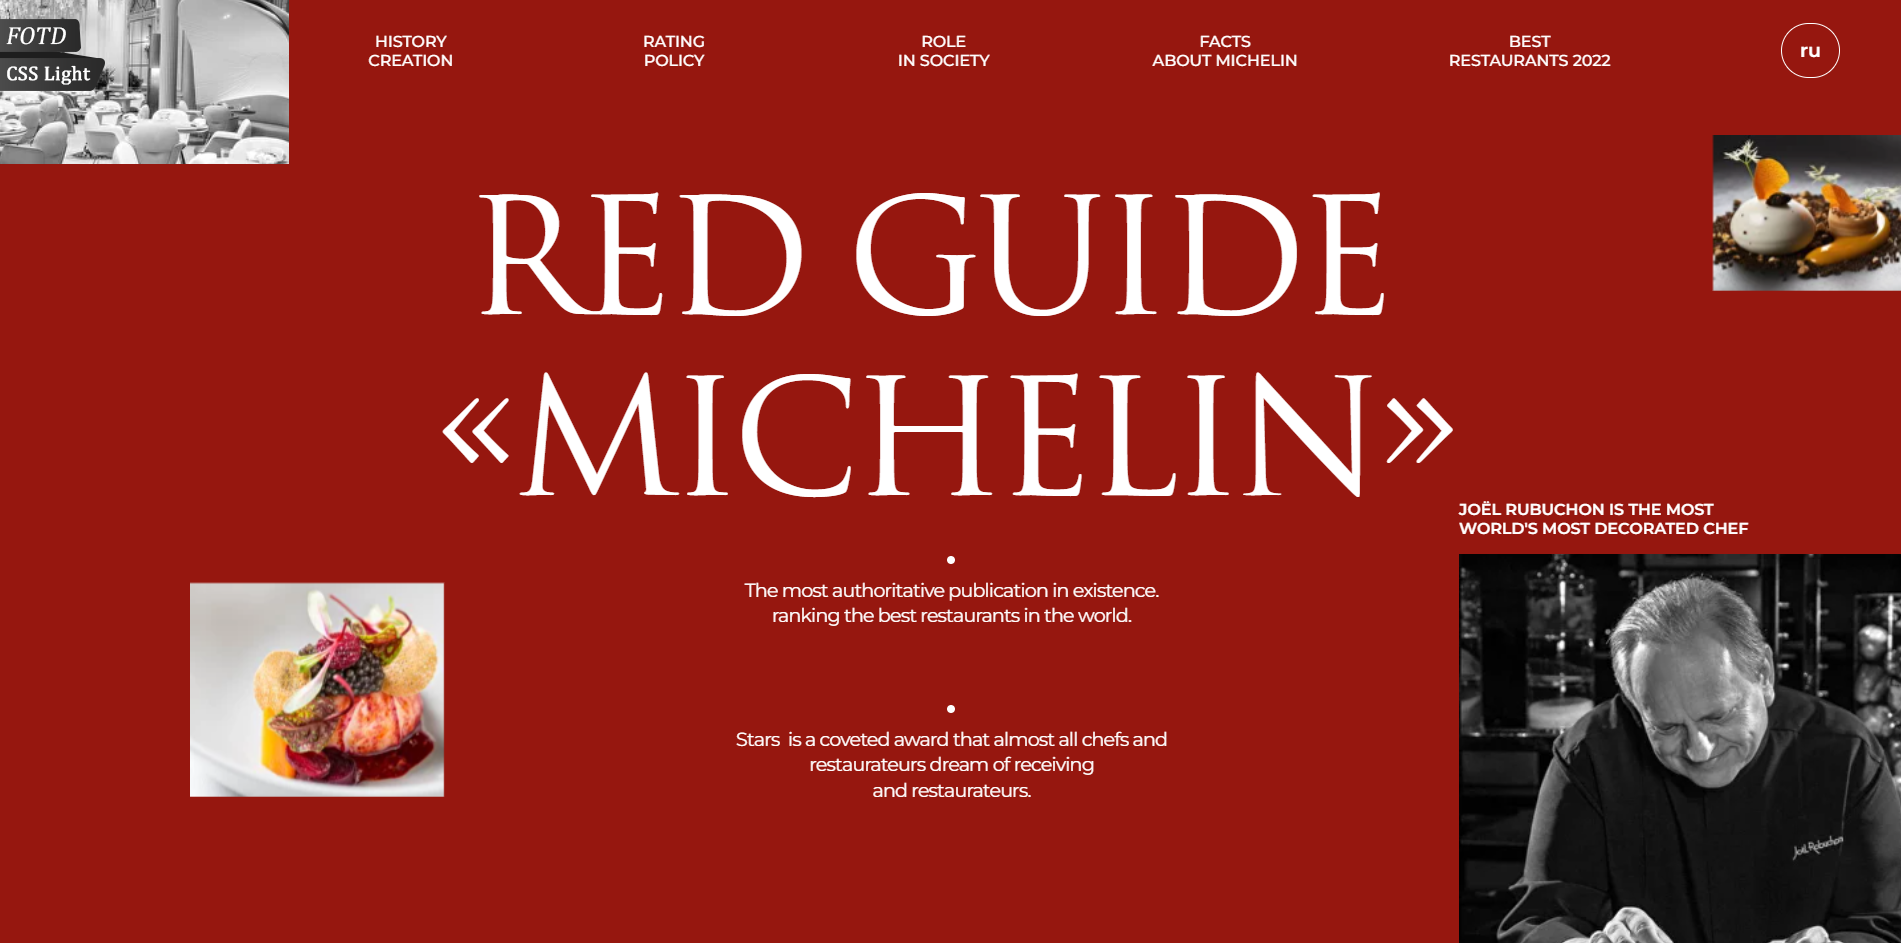 The Michelin Guide Art & Illustration Animation on scroll